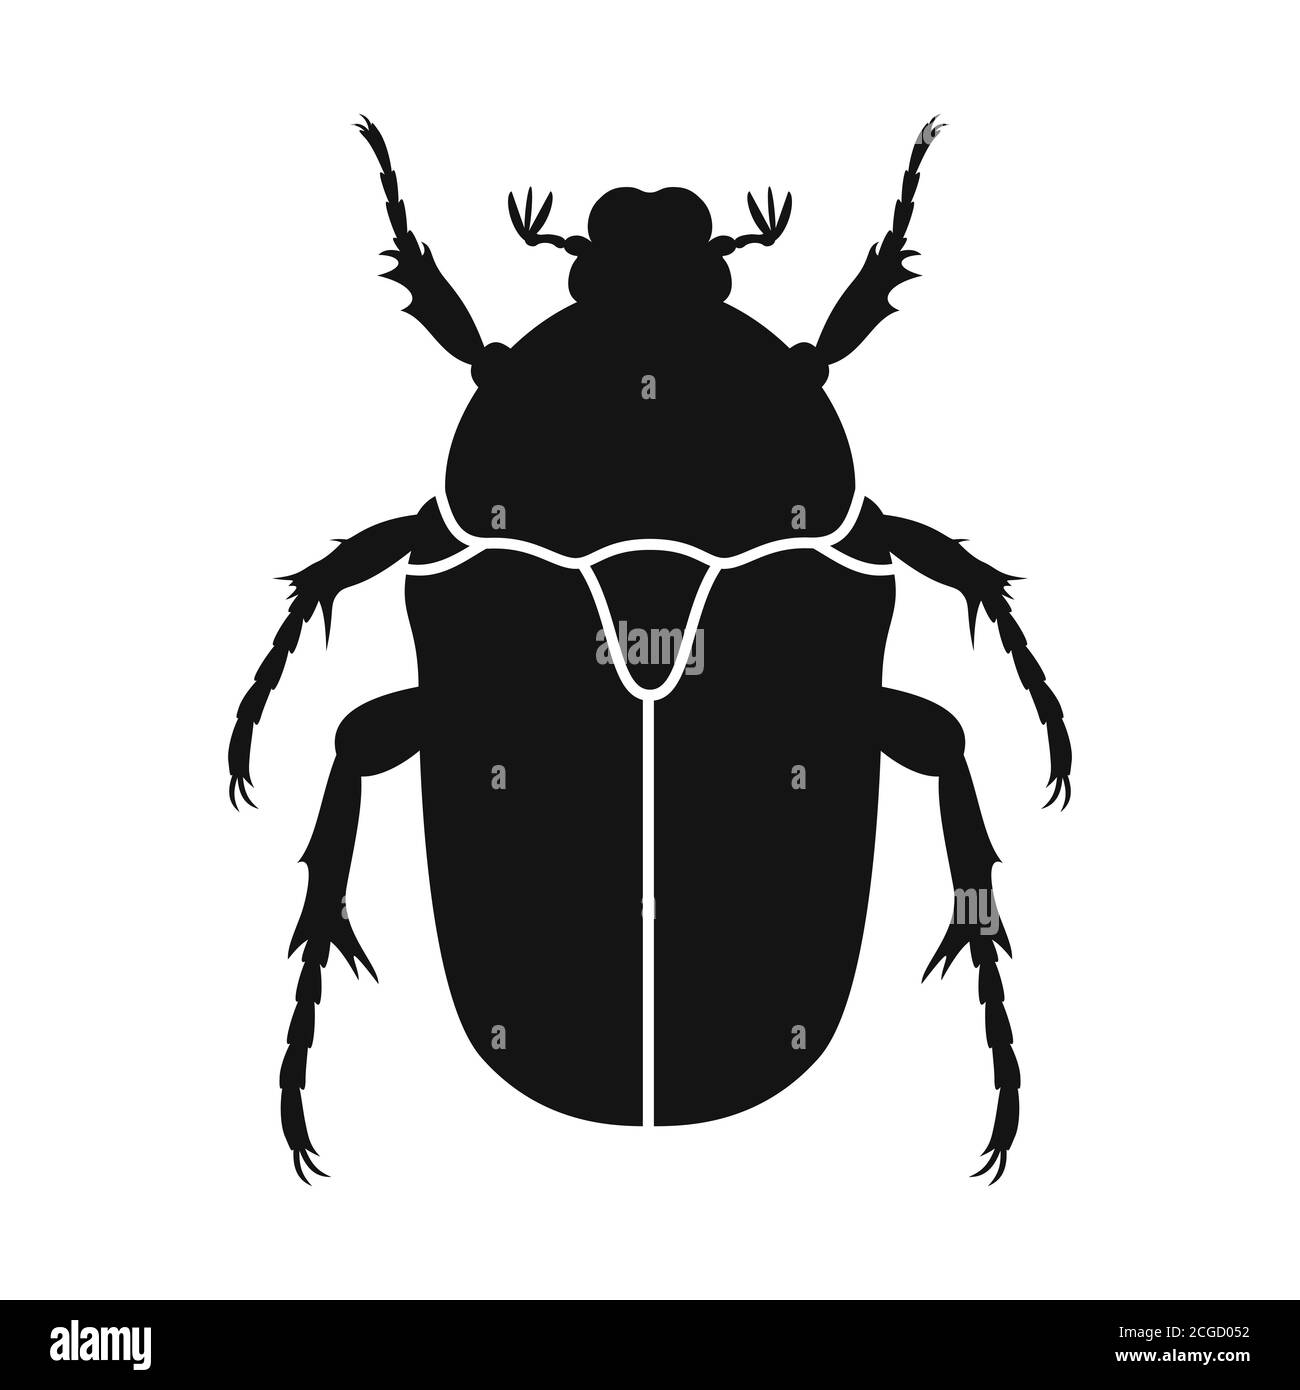 Chafer vector icon. Black silhouette of chafer beetle. Insect icon isolated. Vector illustration. Chafer beetle logo in flat style Stock Vector